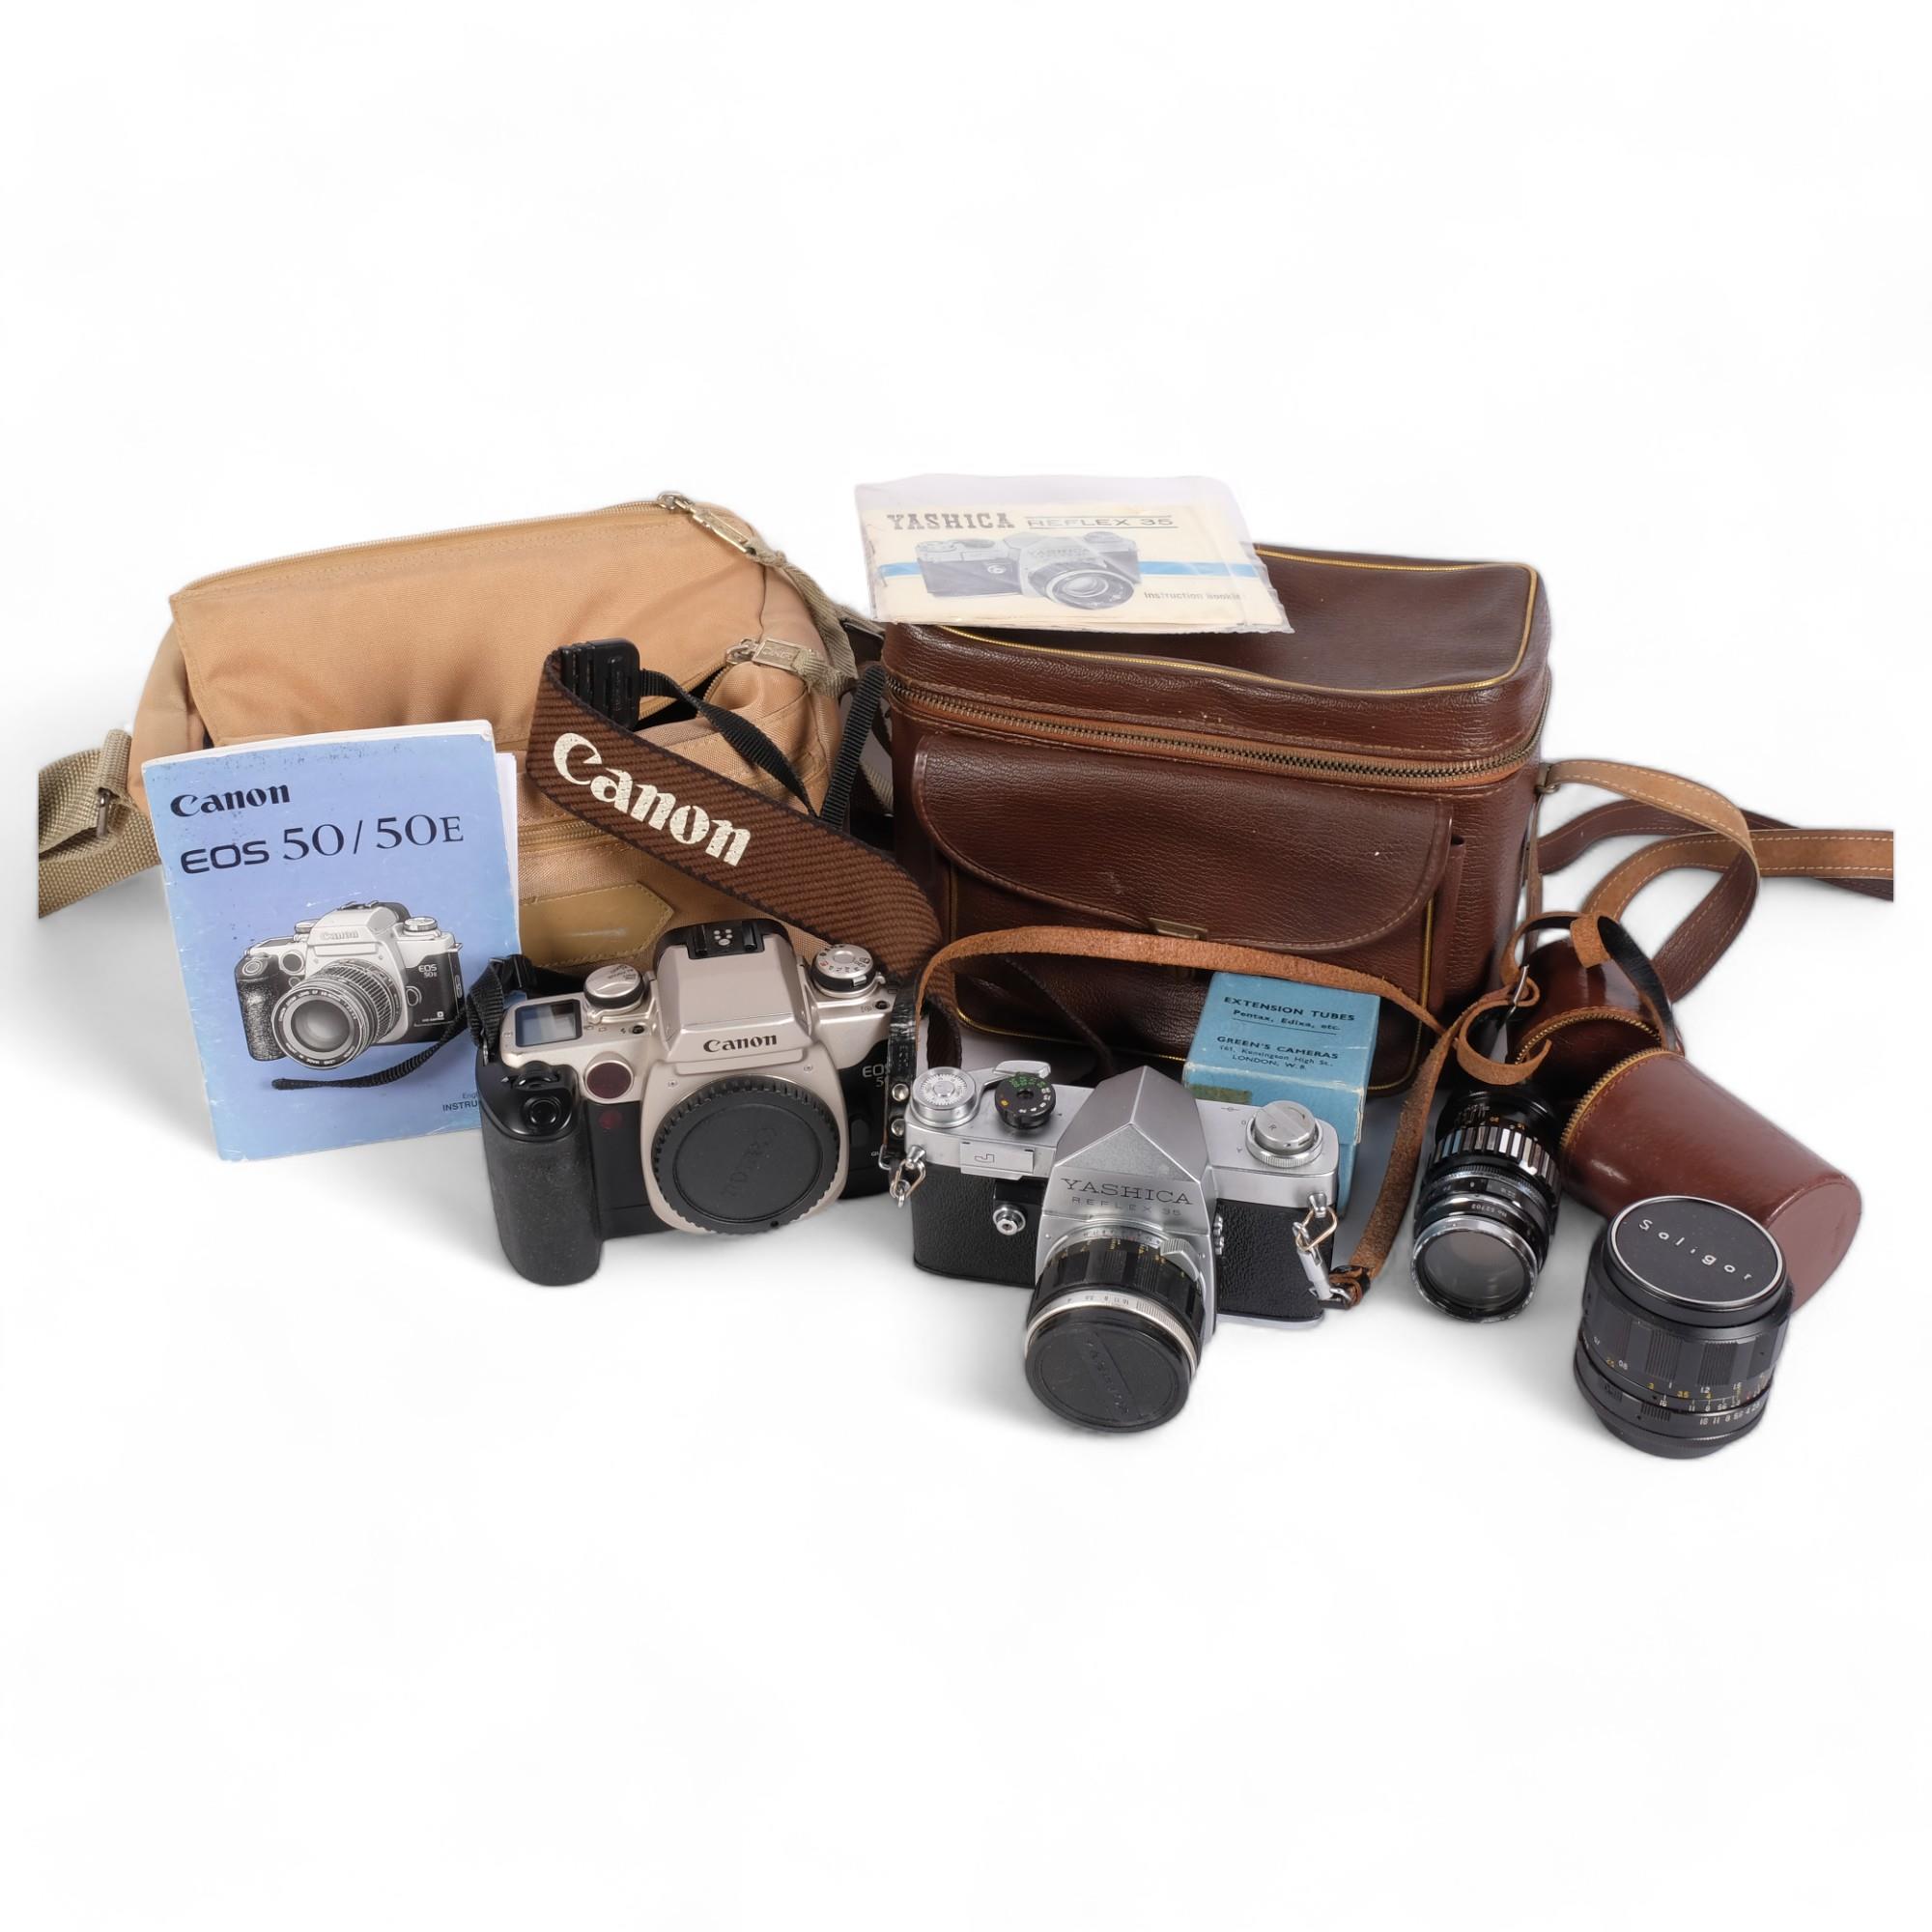 A Canon E0S 50 digital camera, in associated softshell carry case, with various ephemera and